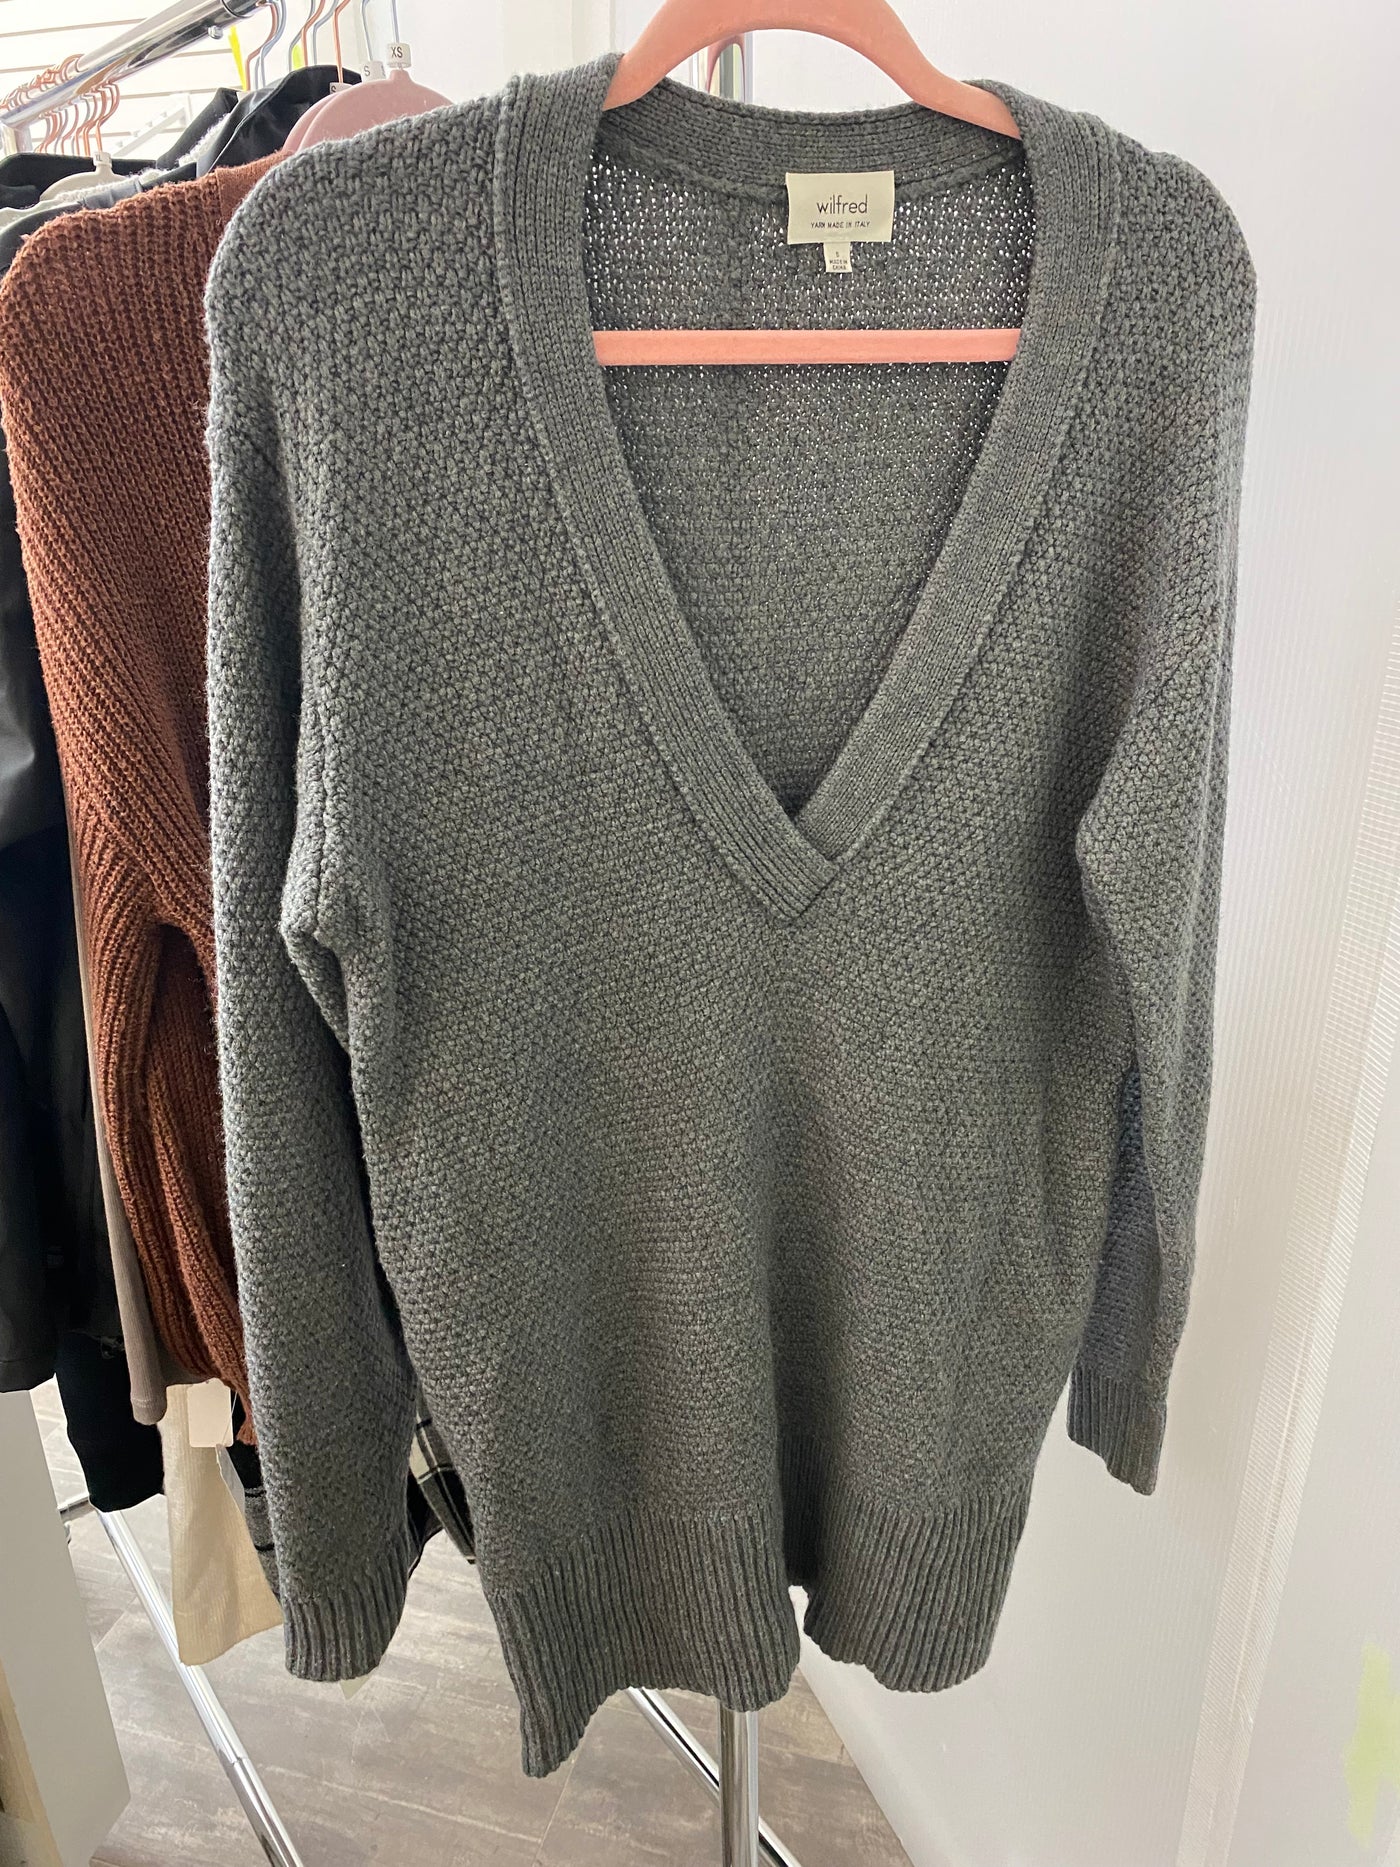 Wilfred Pocket Tunic Sweater